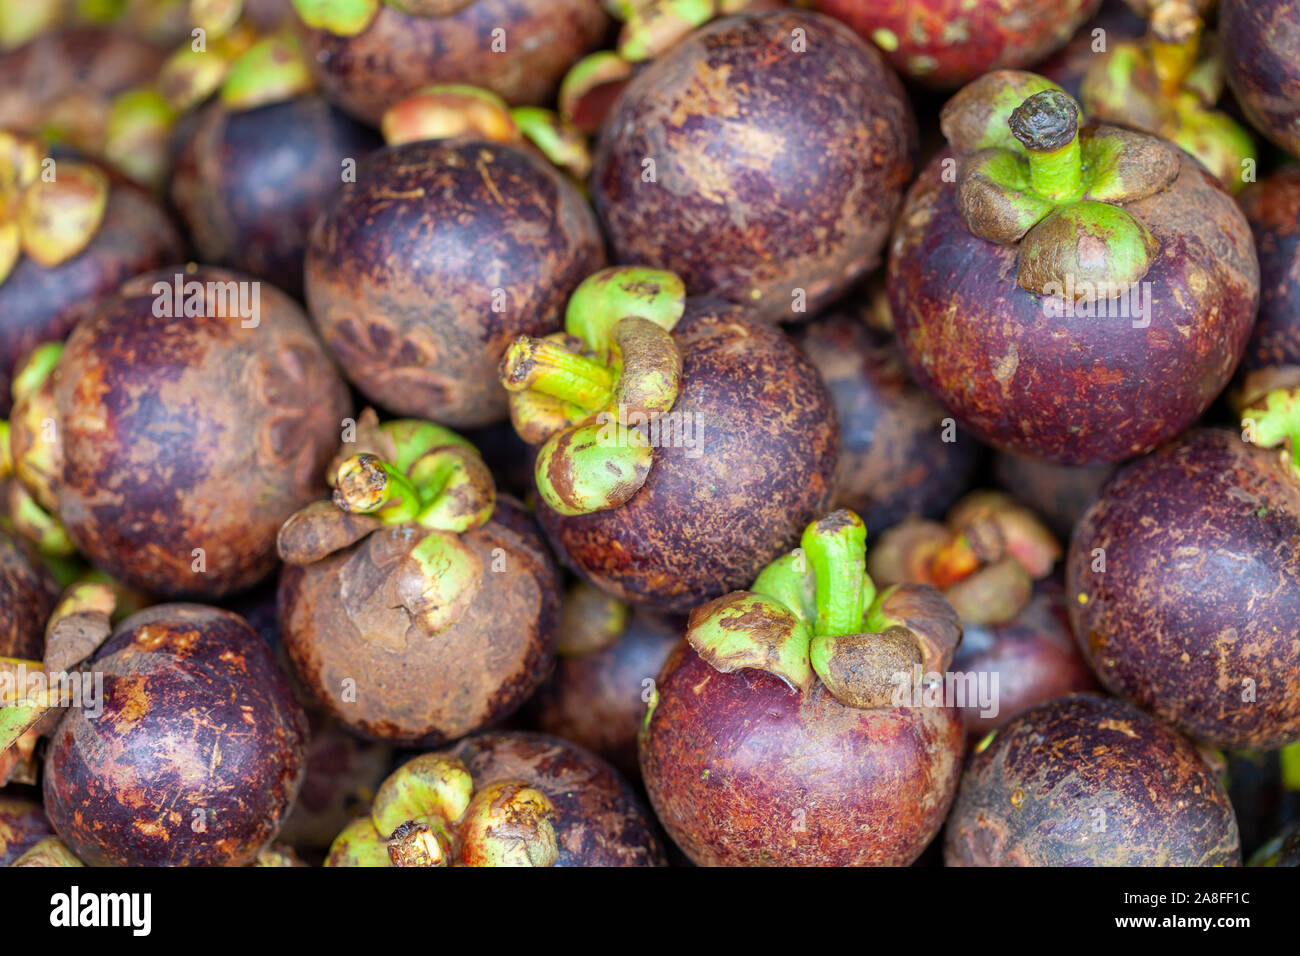 Pile of mangosteen, the queen of fruits. Those fruits are found all over South East Asia and are juicy and delicious. Stock Photo